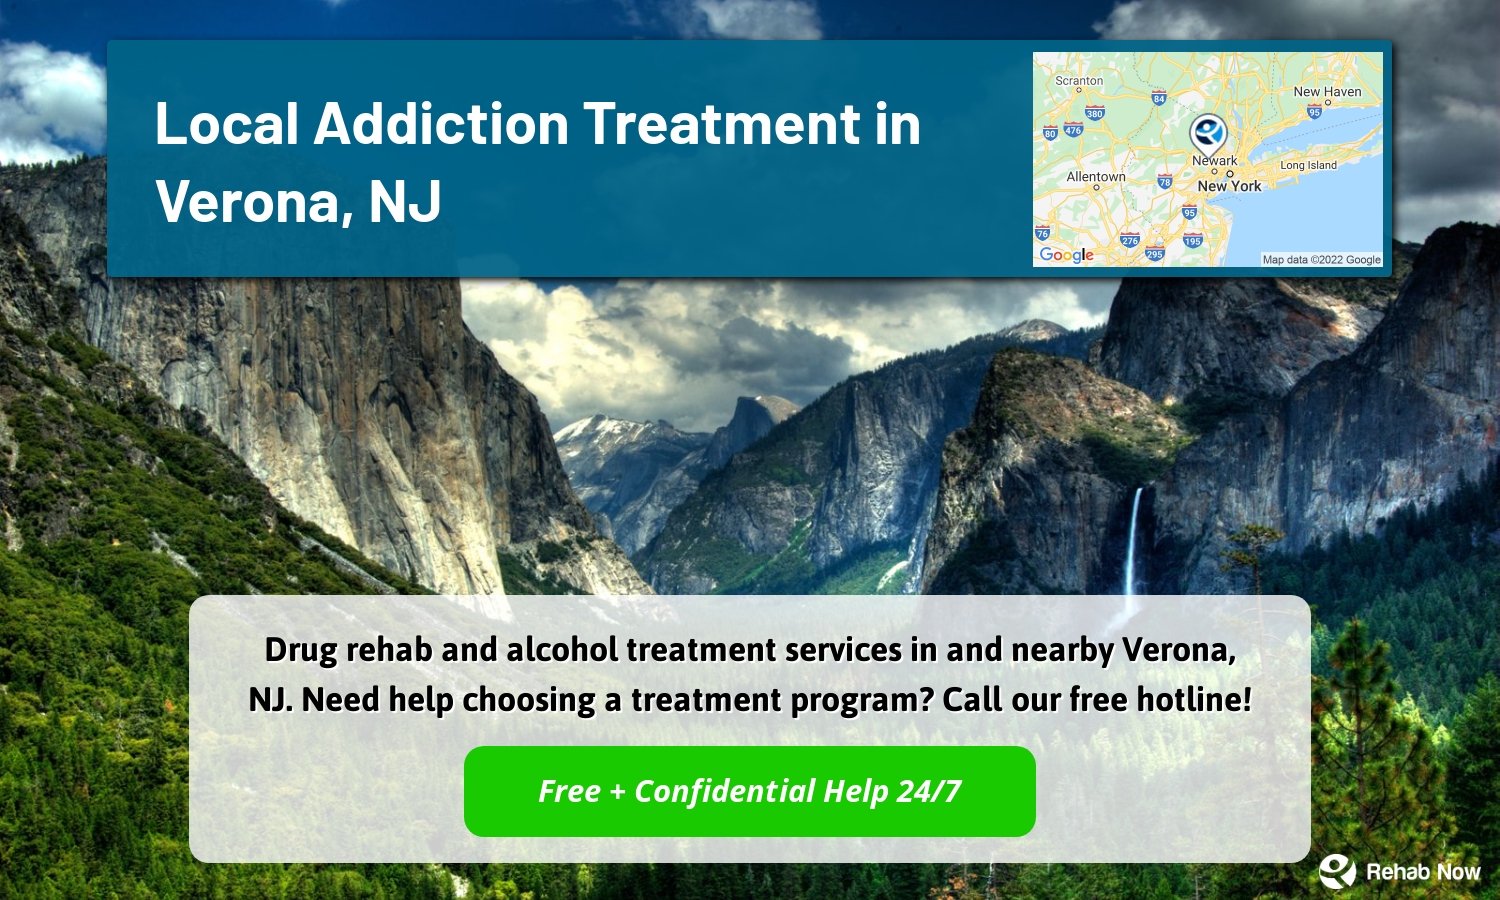 Drug rehab and alcohol treatment services in and nearby Verona, NJ. Need help choosing a treatment program? Call our free hotline!